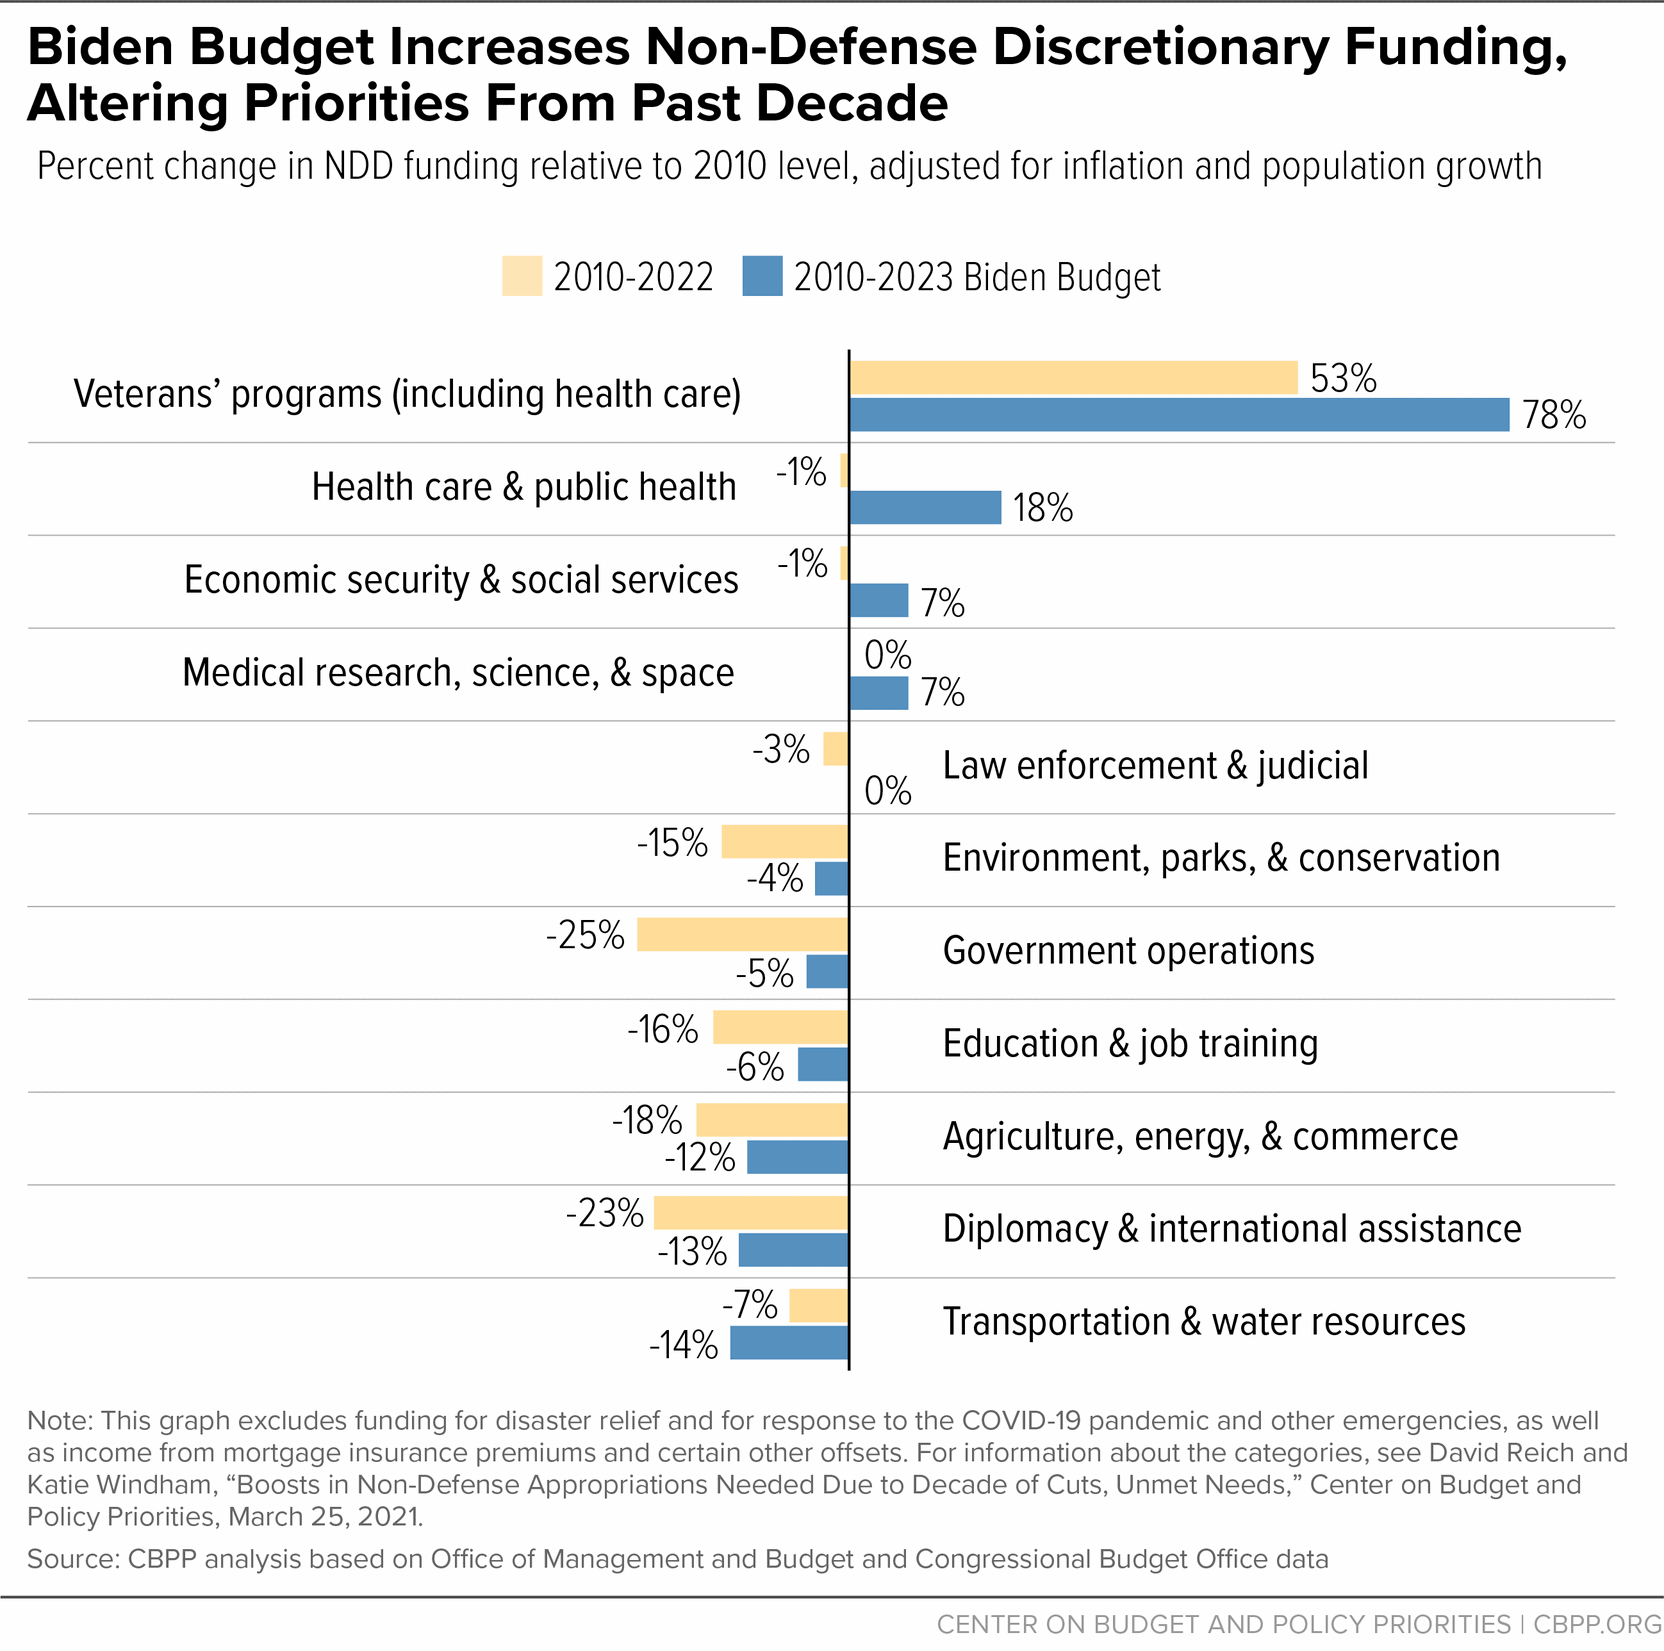 Biden Budget Increases Non-Defense Discretionary Funding, Altering Priorities From Past Decade